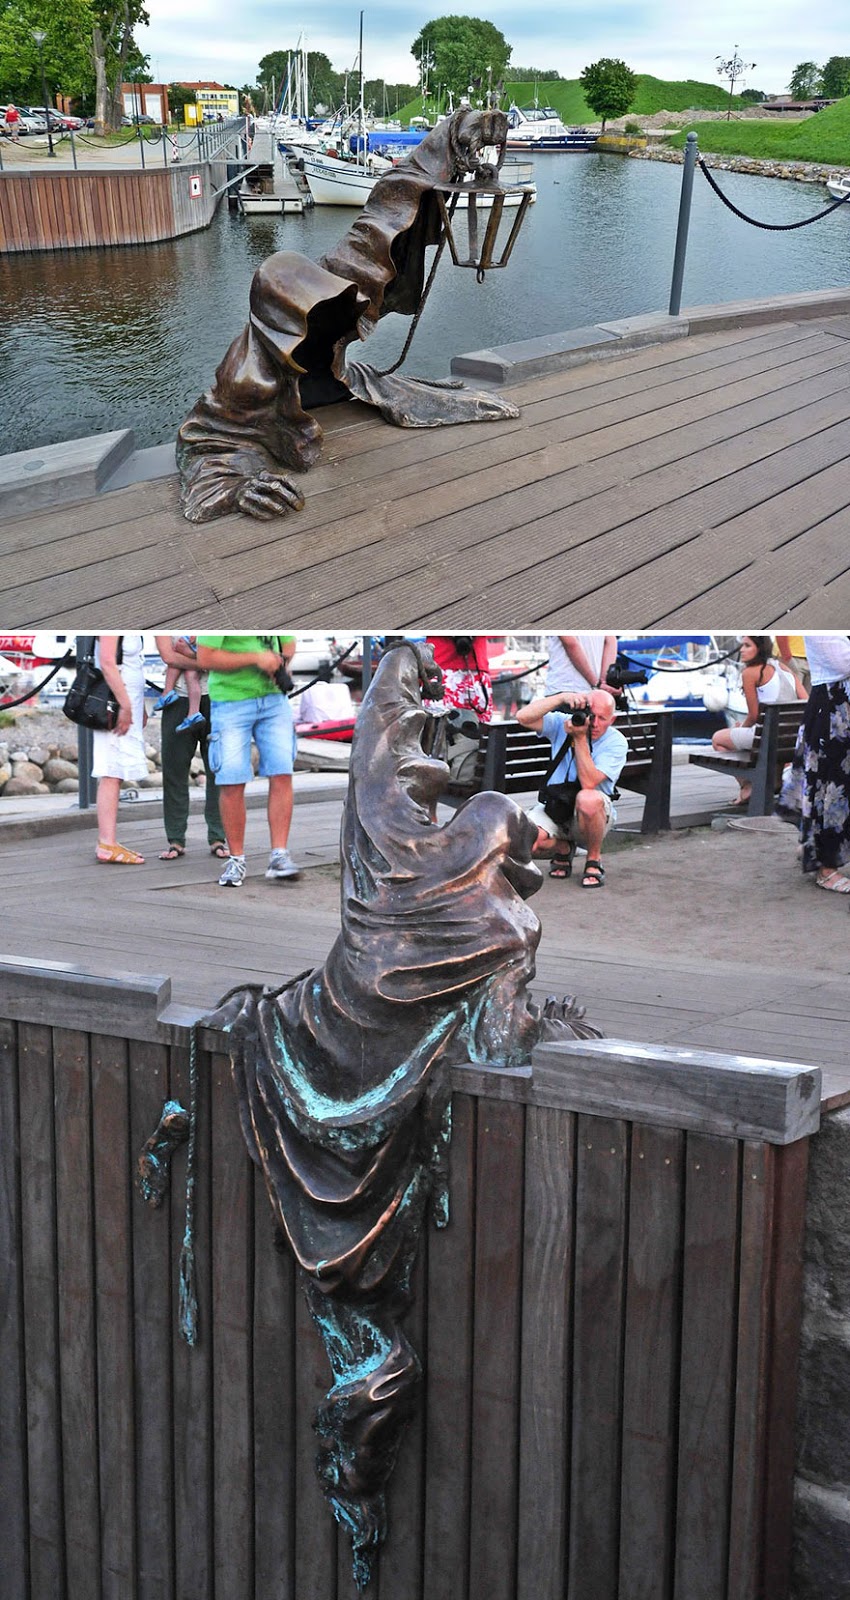 42 Of The Most Beautiful Sculptures In The World - Black Ghost, Klaipeda, Lithuania